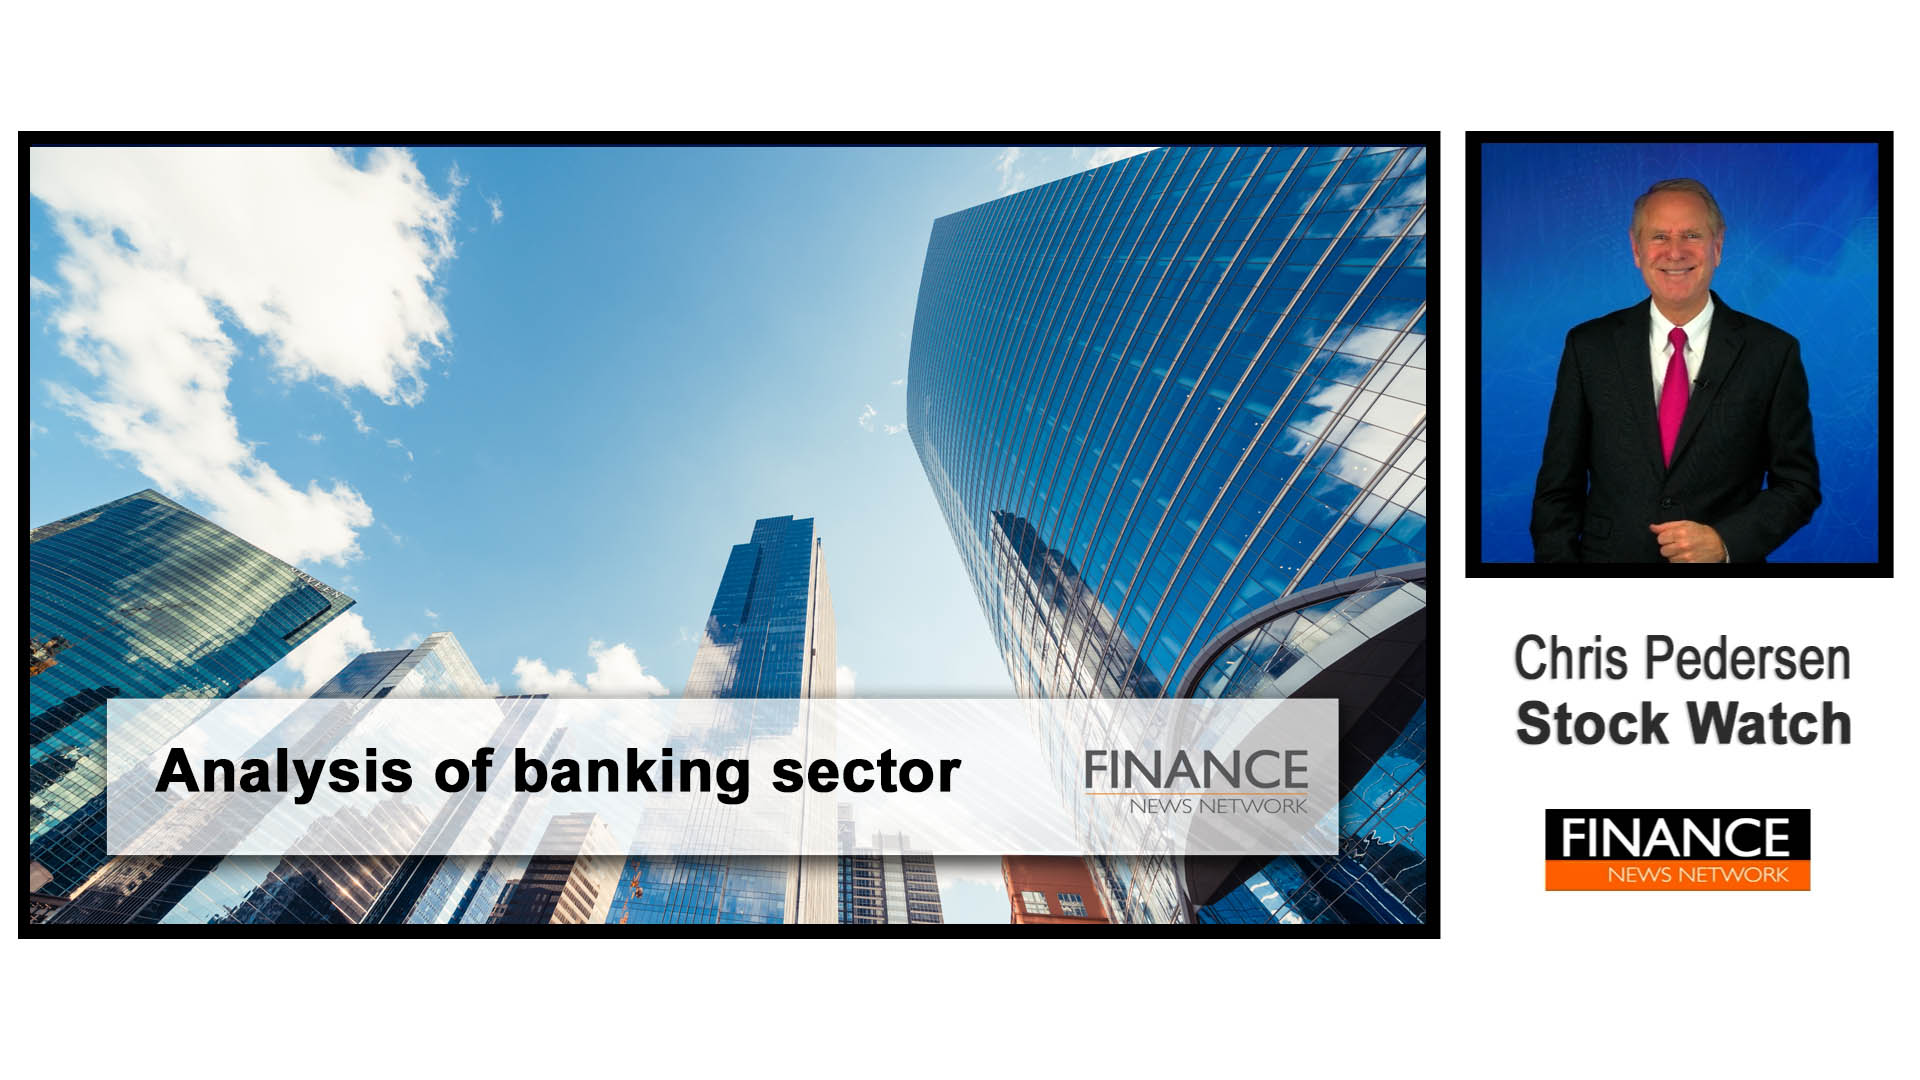 Analysis of the banking sector